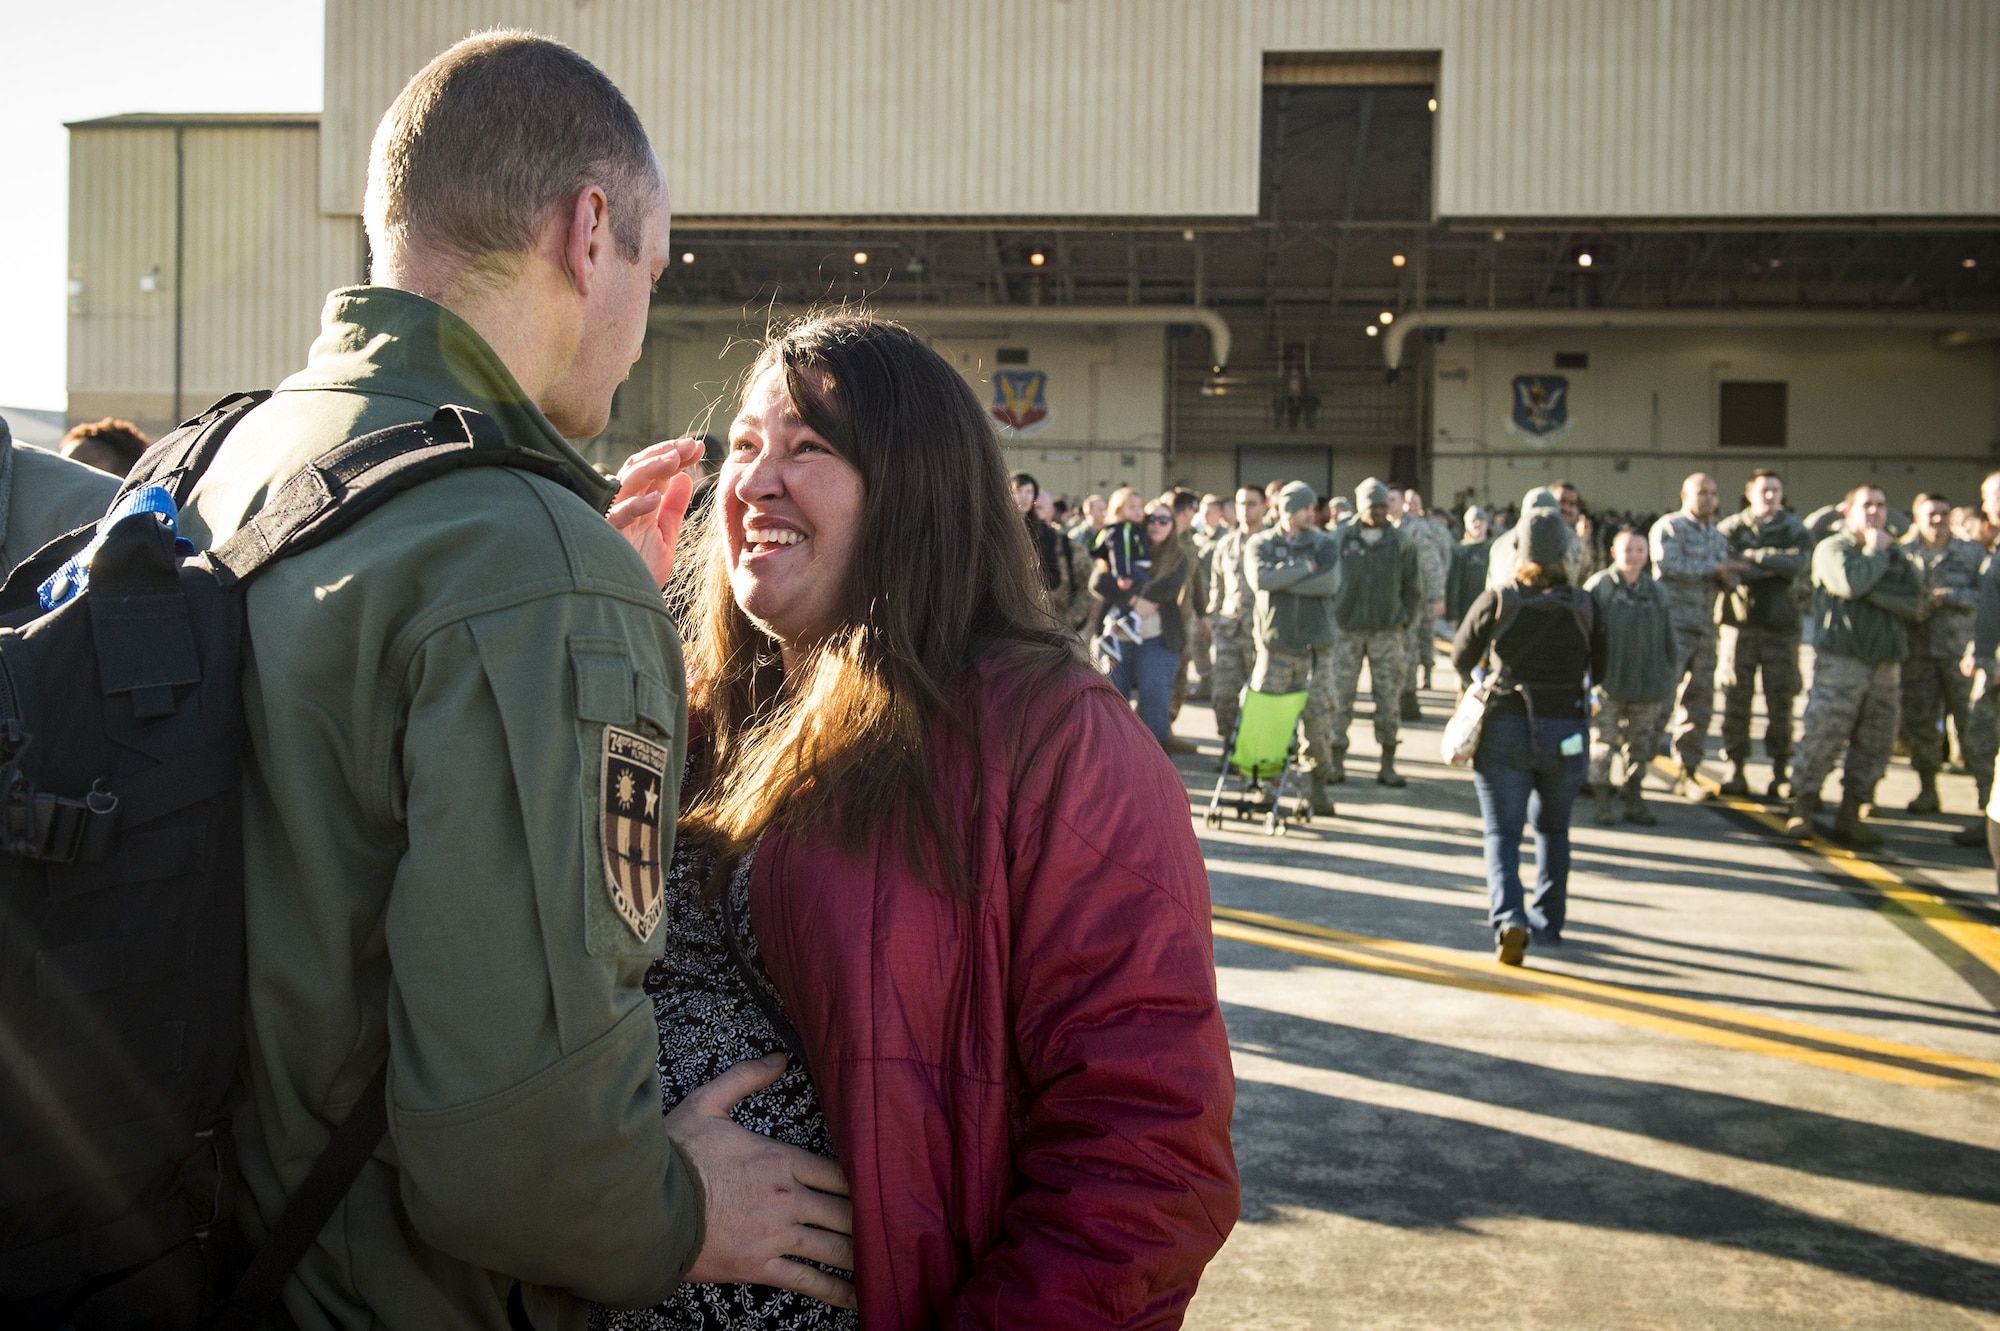 Maj. Matthew “Chowder” Cichowski, 74th Expeditionary Fighter Squadron (EFS) A-10C Thunderbolt II pilot, greets his wife, Sara during a redeployment ceremony, Jan. 19, 2018, at Moody Air Force Base, Ga. During the seven-month deployment, the 74th FS flew more than 1,700 sorties, employed weapons over 4,400 times, destroyed 2,300 targets and killed 2,800 ISIS insurgents. (U.S. Air Force photo by Staff Sgt. Ceaira Young)